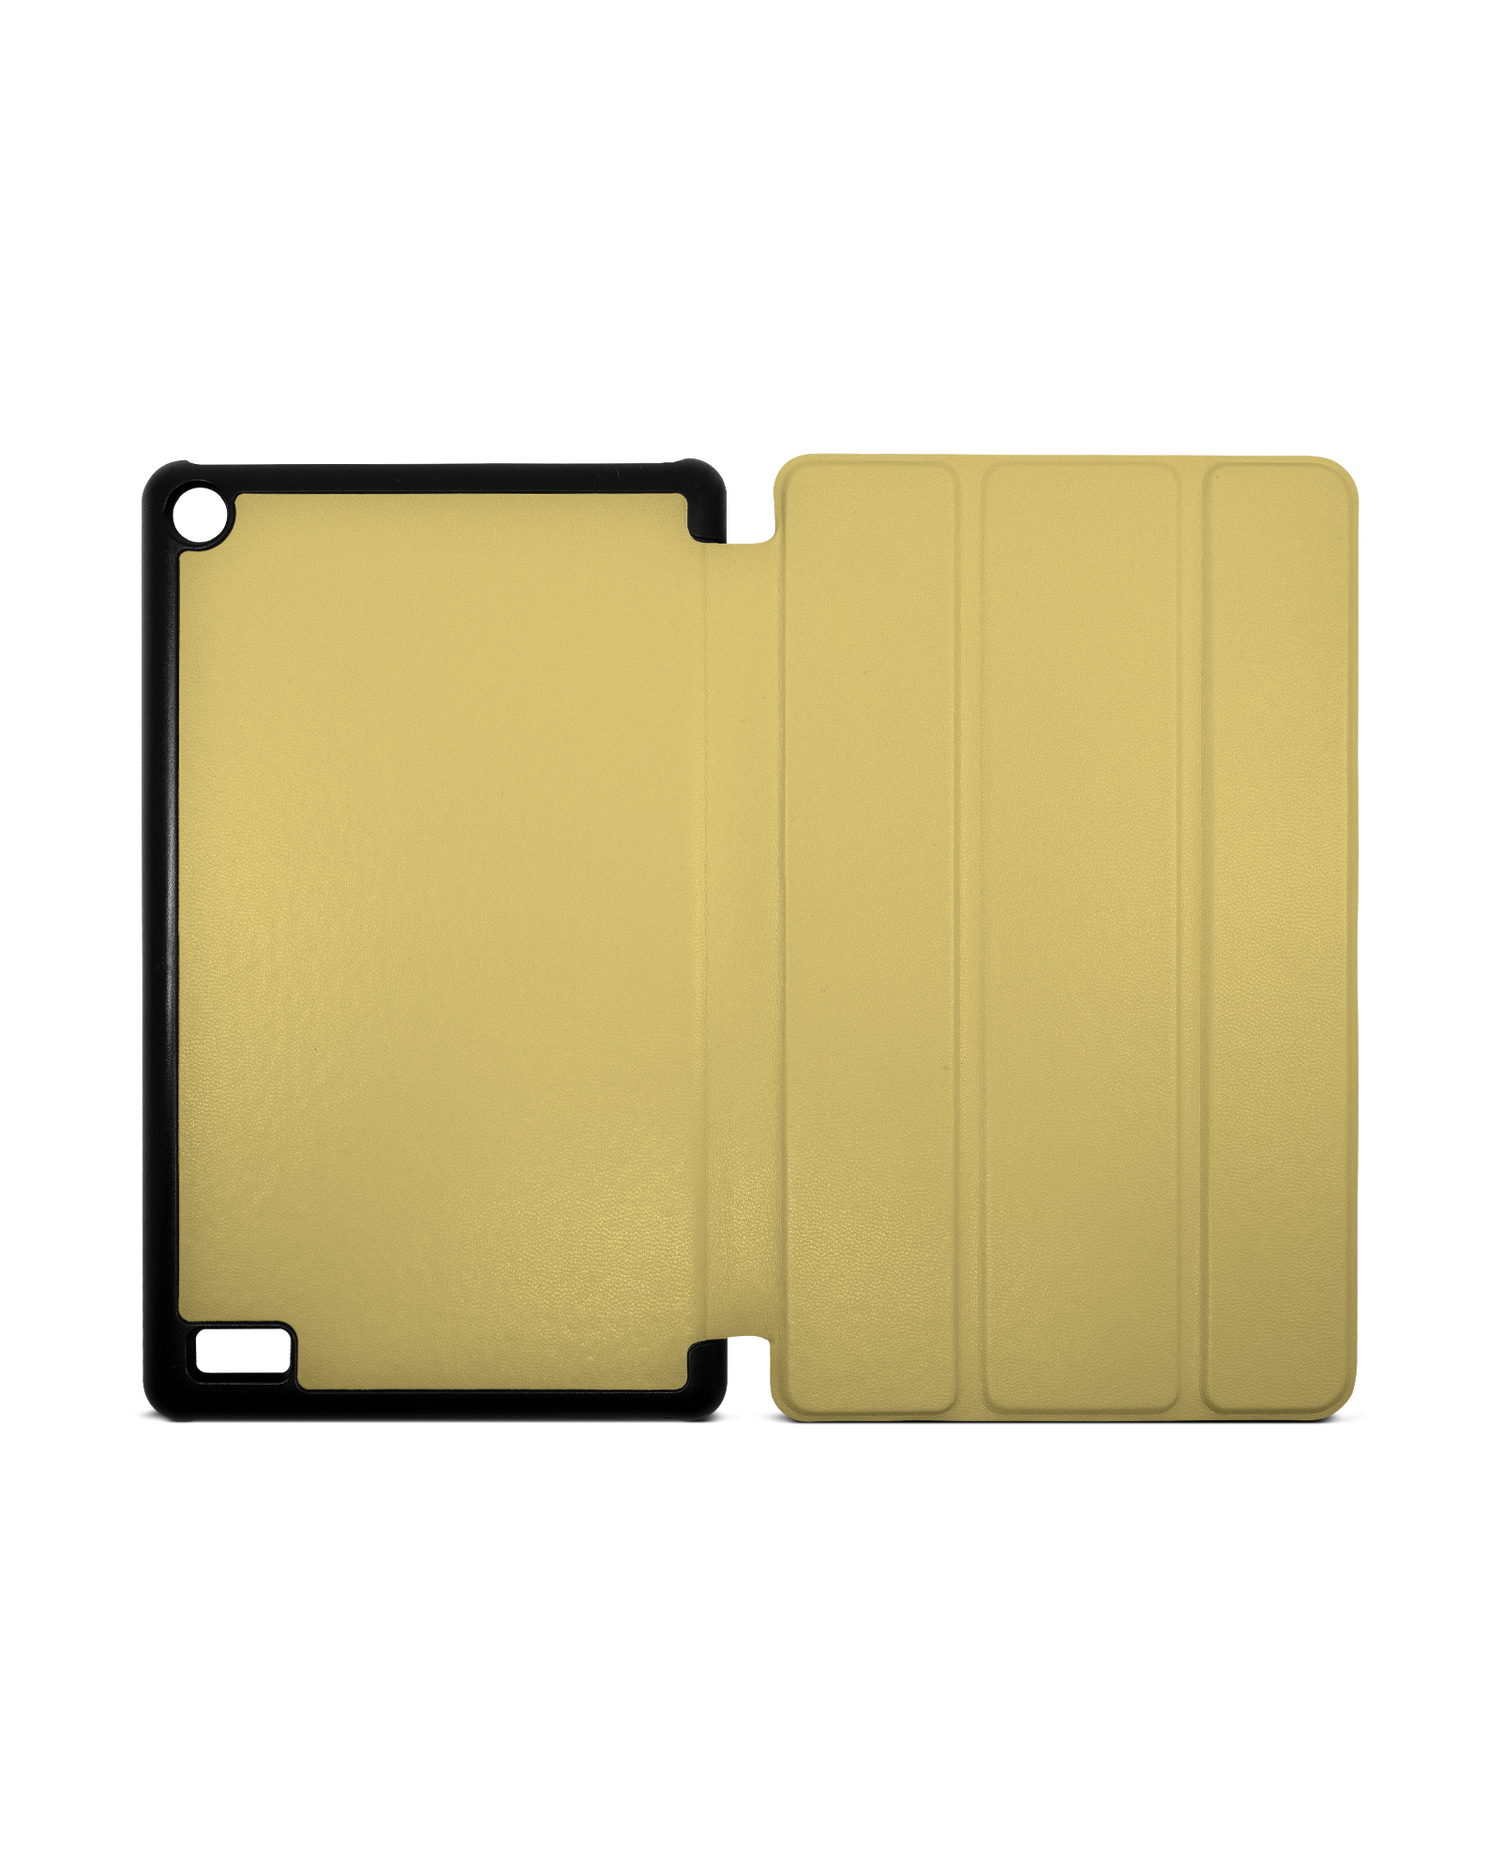 LIGHT YELLOW Tablet Smart Case for Amazon Fire 7: Opened